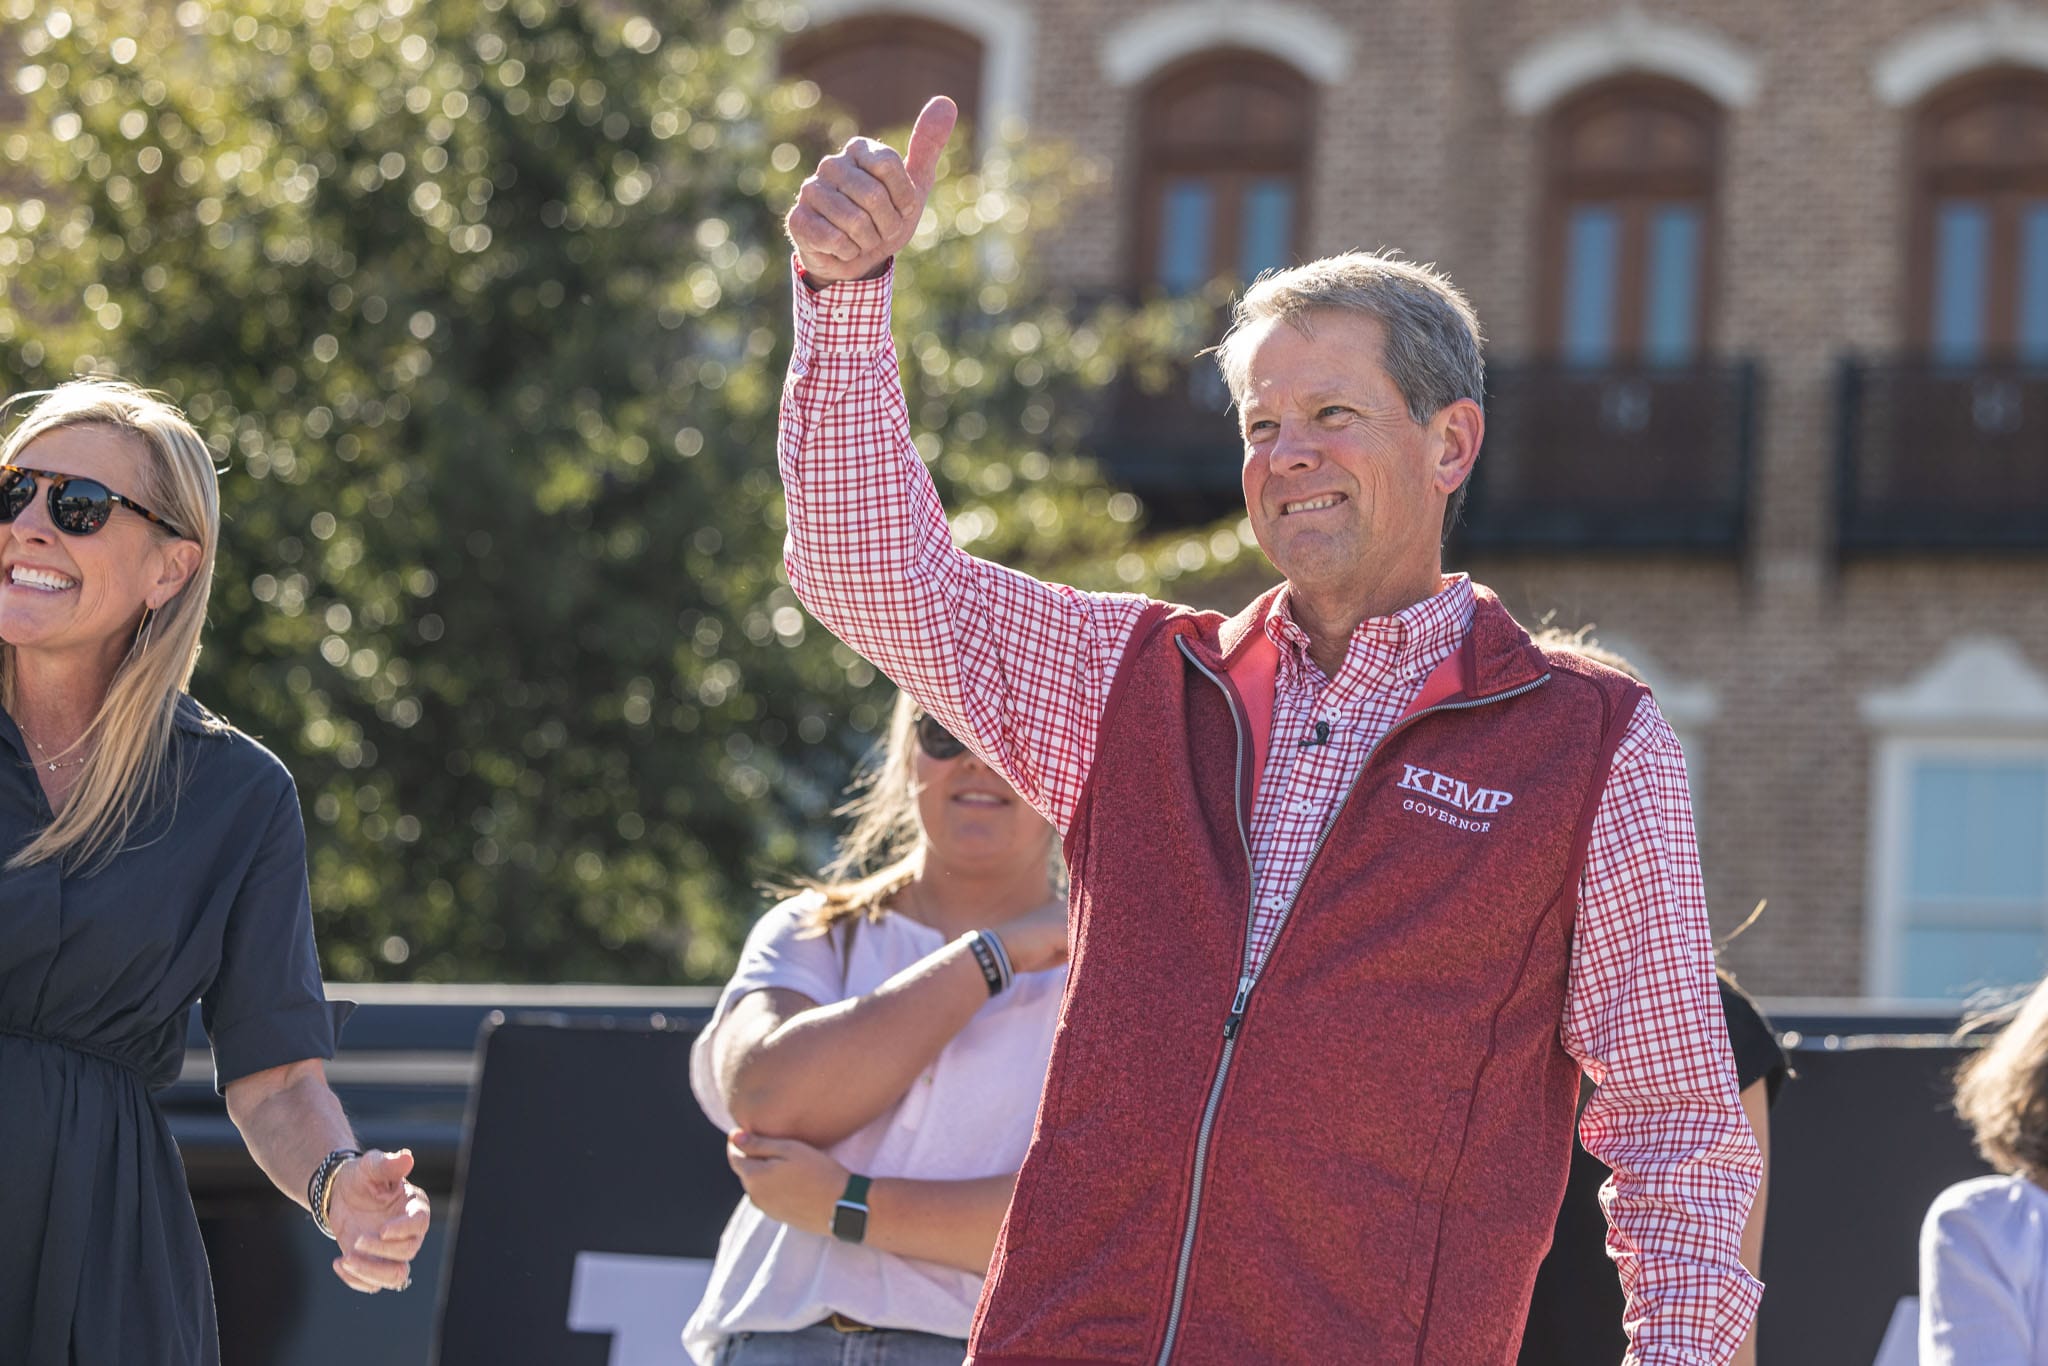 Elected-Georiga-governor-Brain-Kemp-holding-thumbs-up-at-crowd-of-people-in-rally-in-alpharetta-georgia